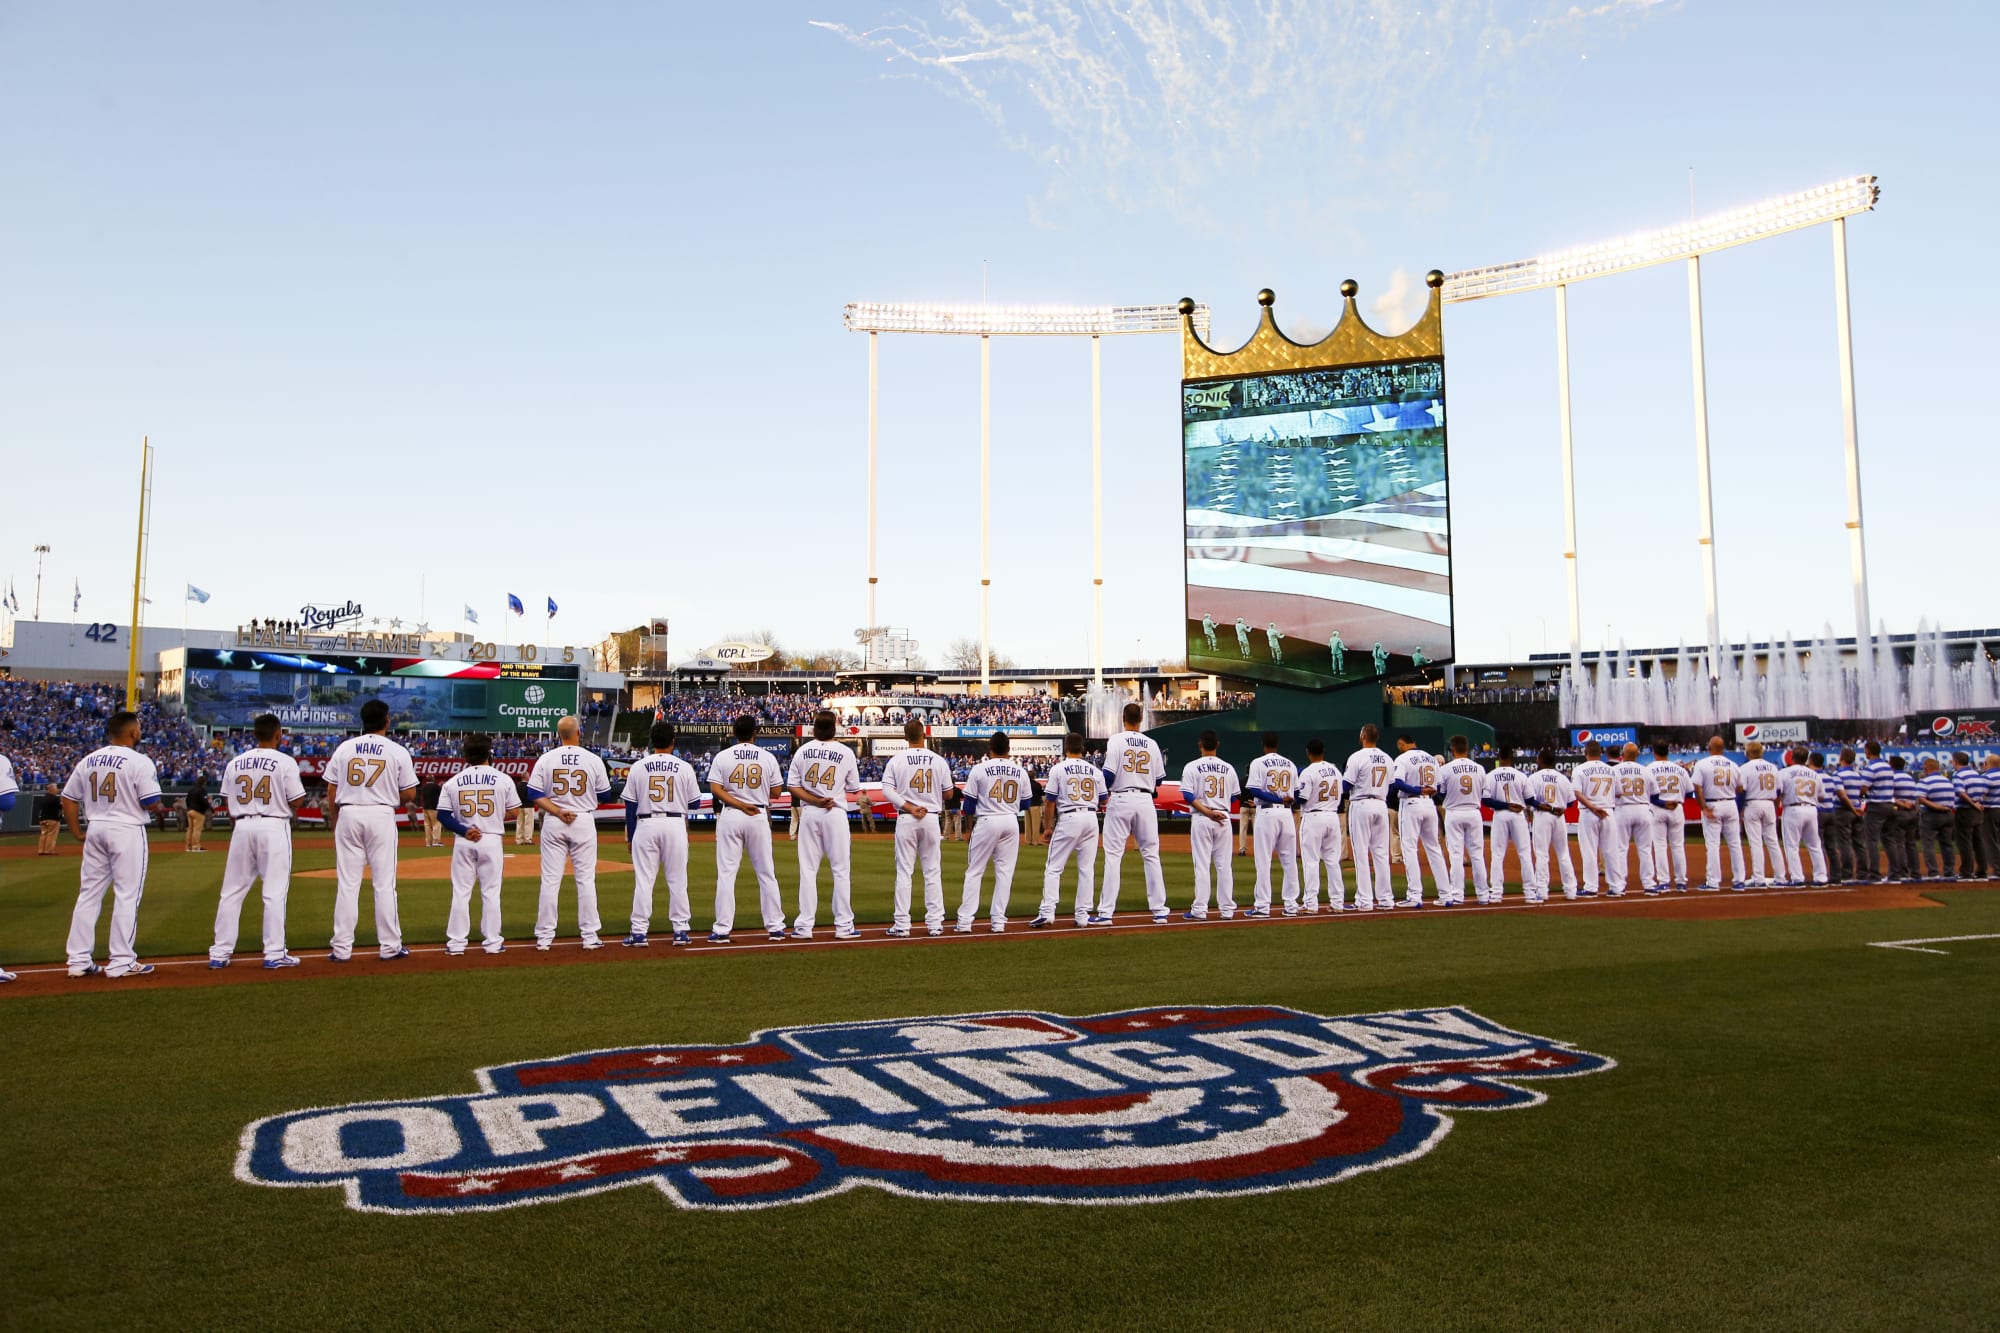 Kansas City Royals Opening Day Lineup is Unveiled